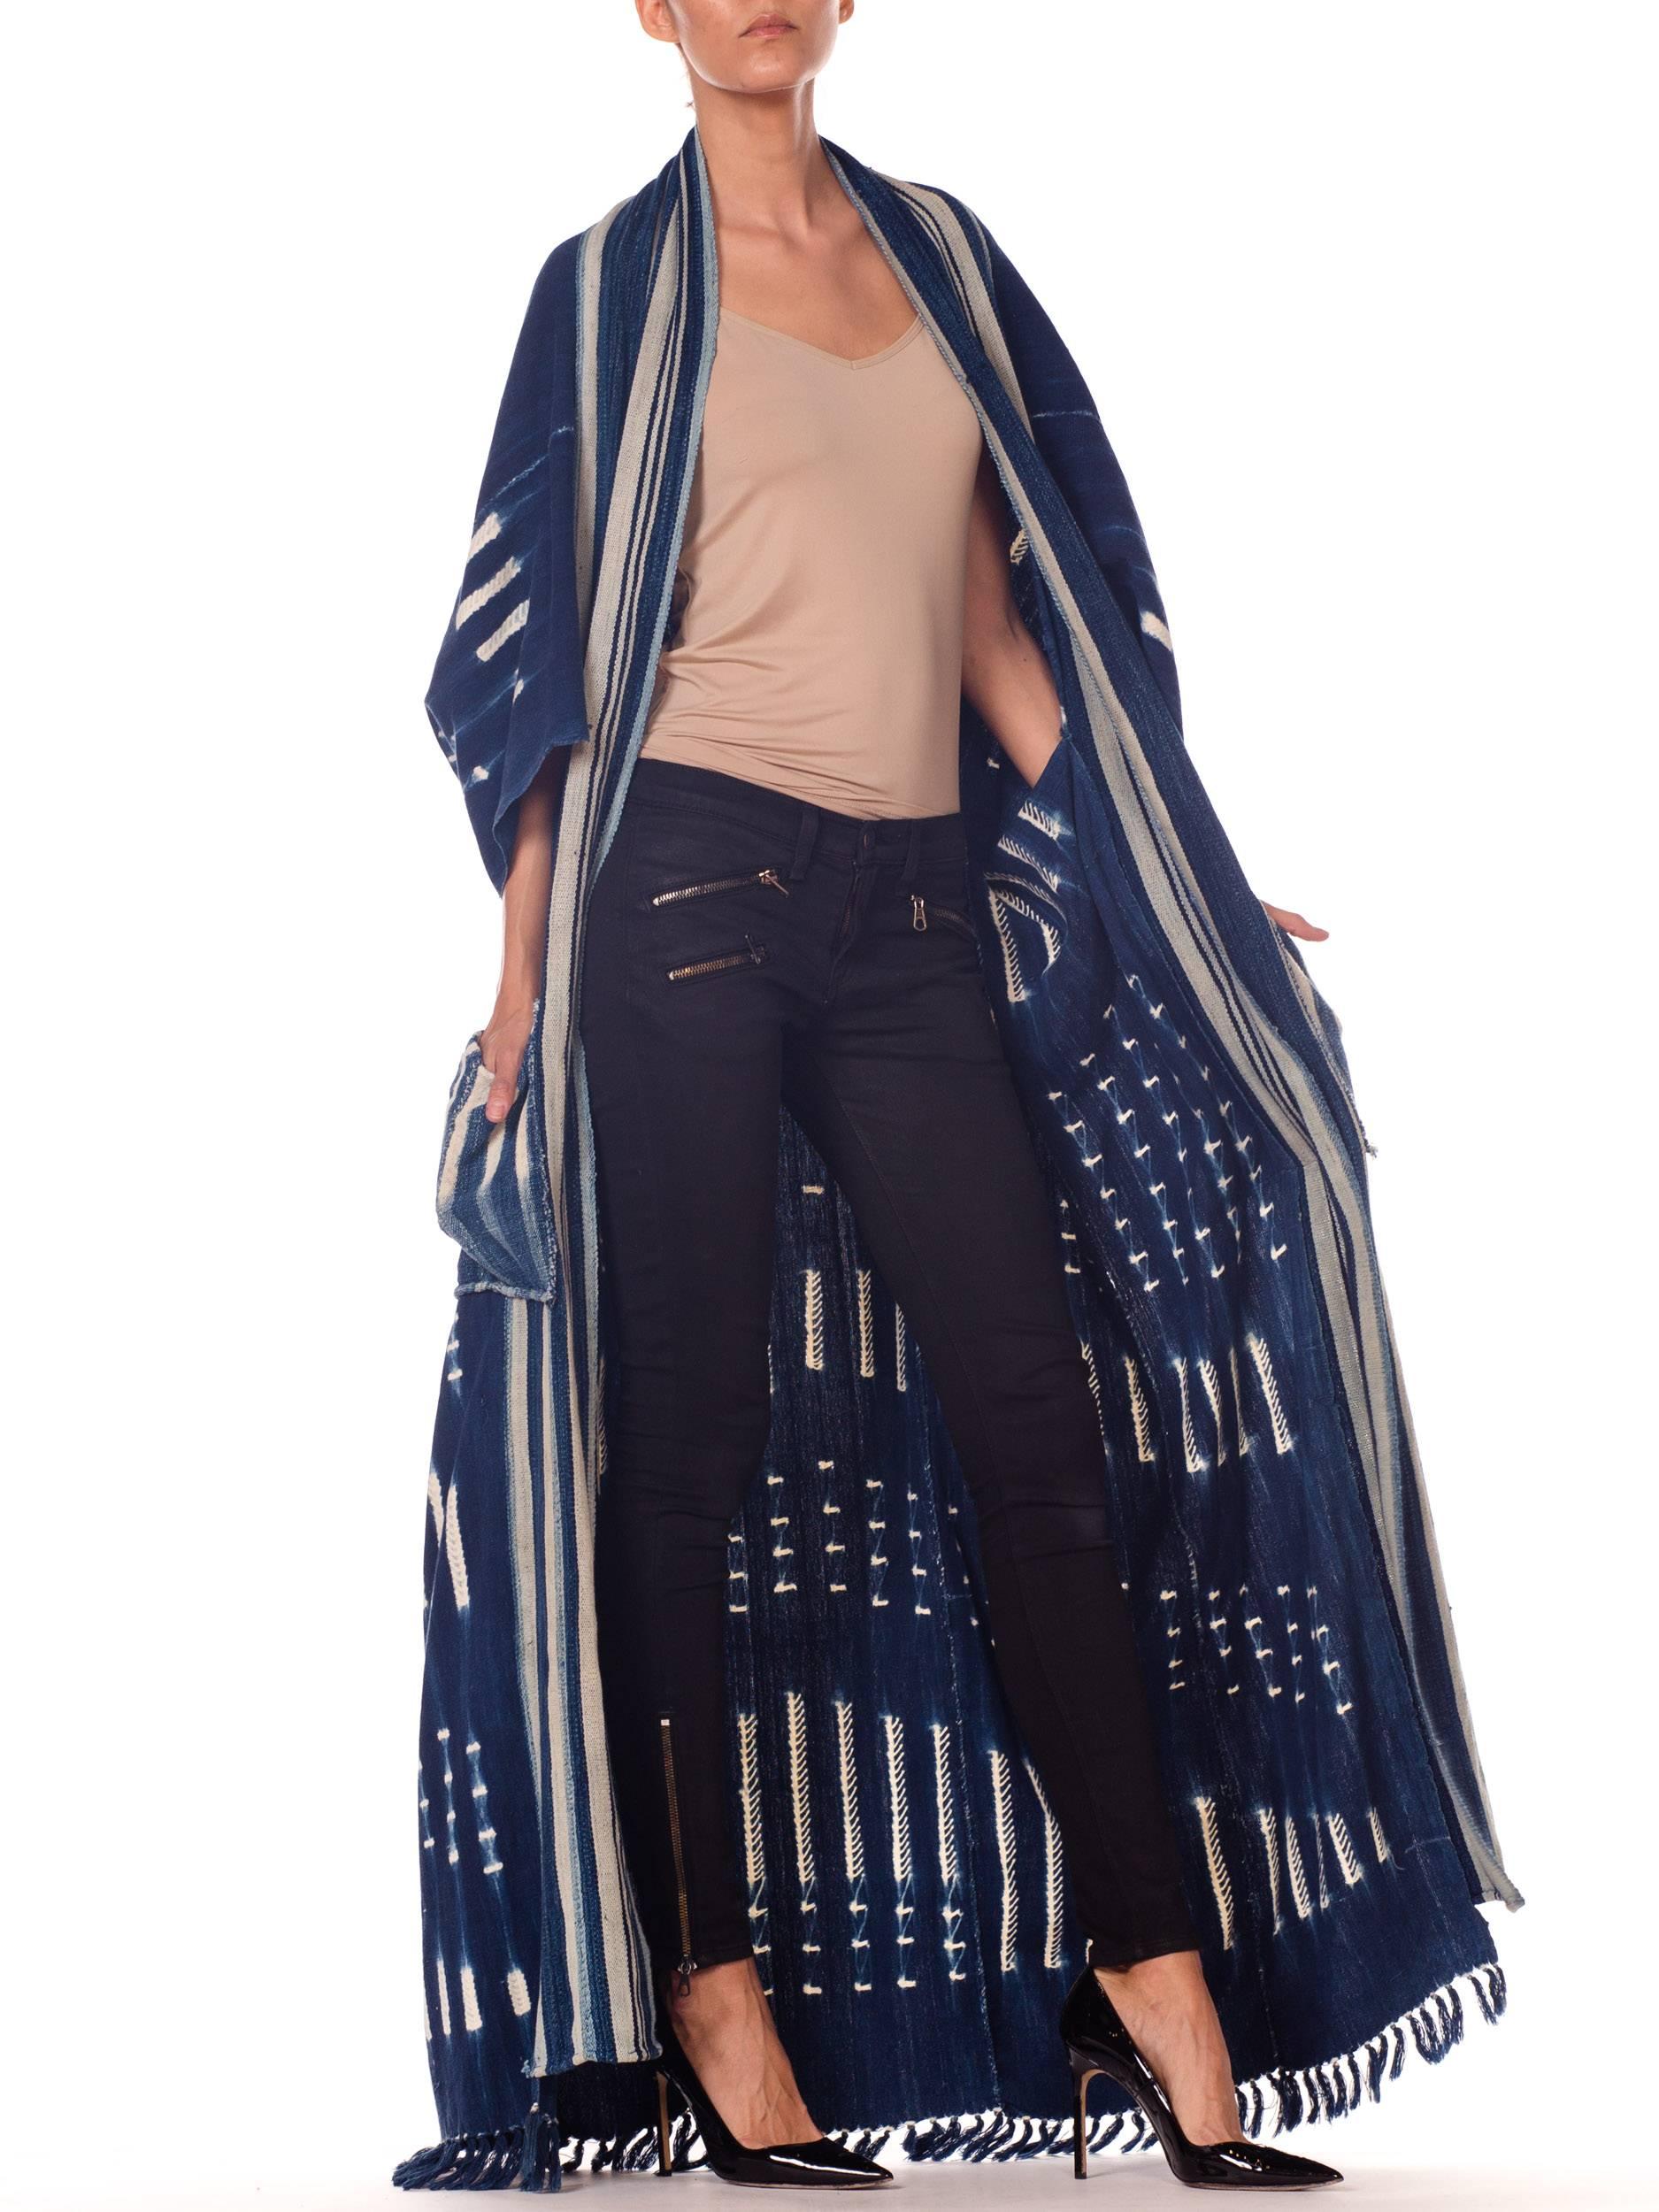 Morphew Collection African Handwoven Tie-dye Indigo Robe with Striped Collar 4